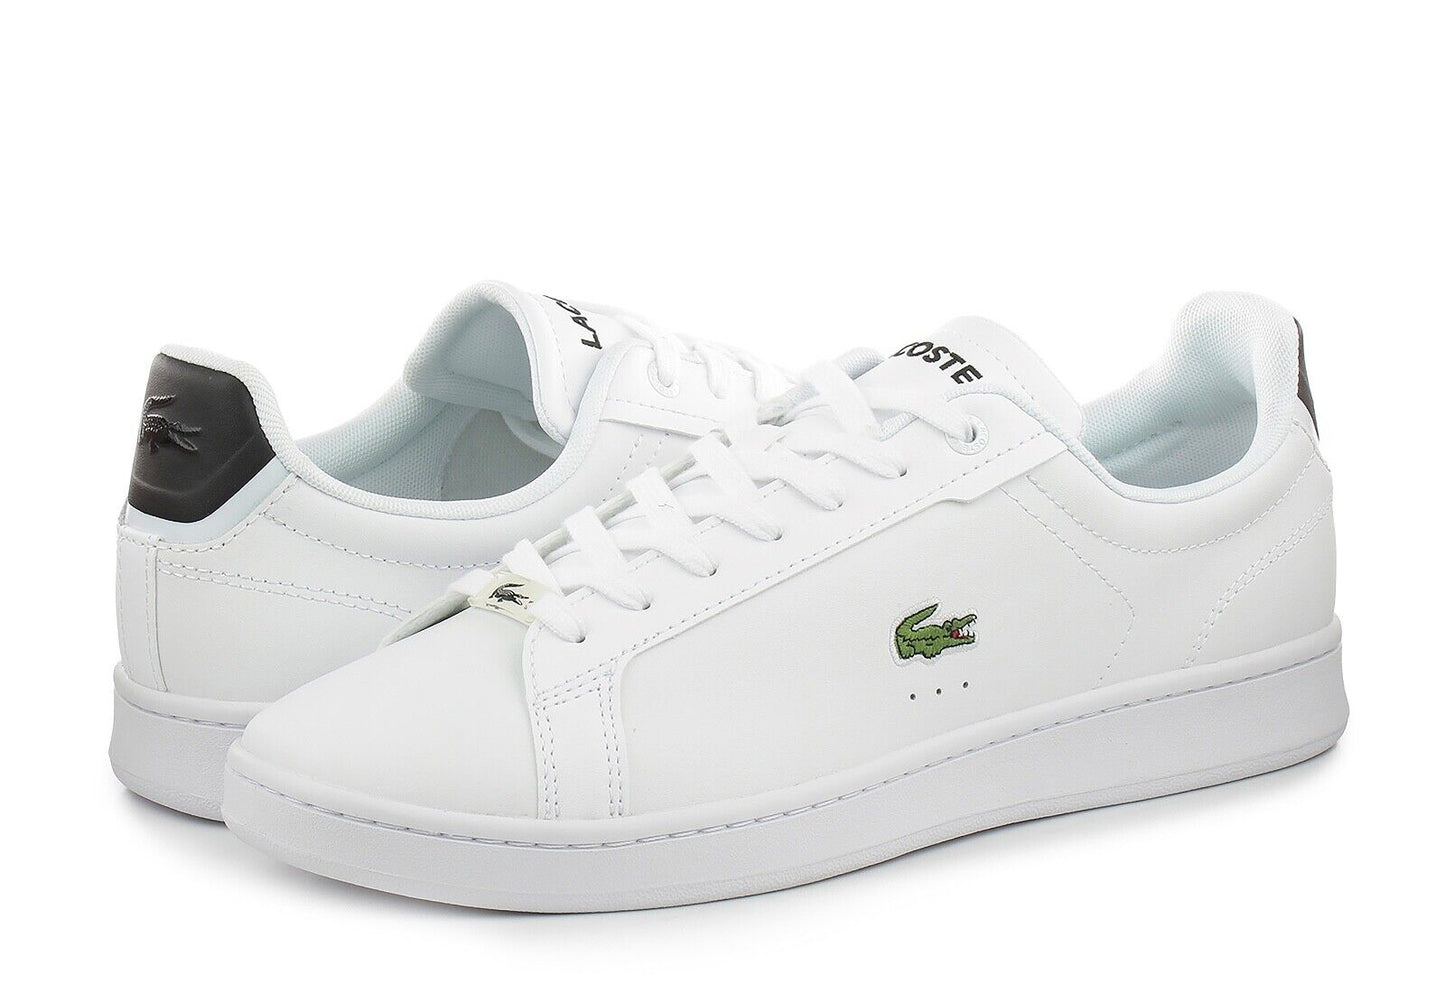 Lacoste Carnaby Pro 123 8 SMA Men’s Trainers in White and Black 745SMA0111147